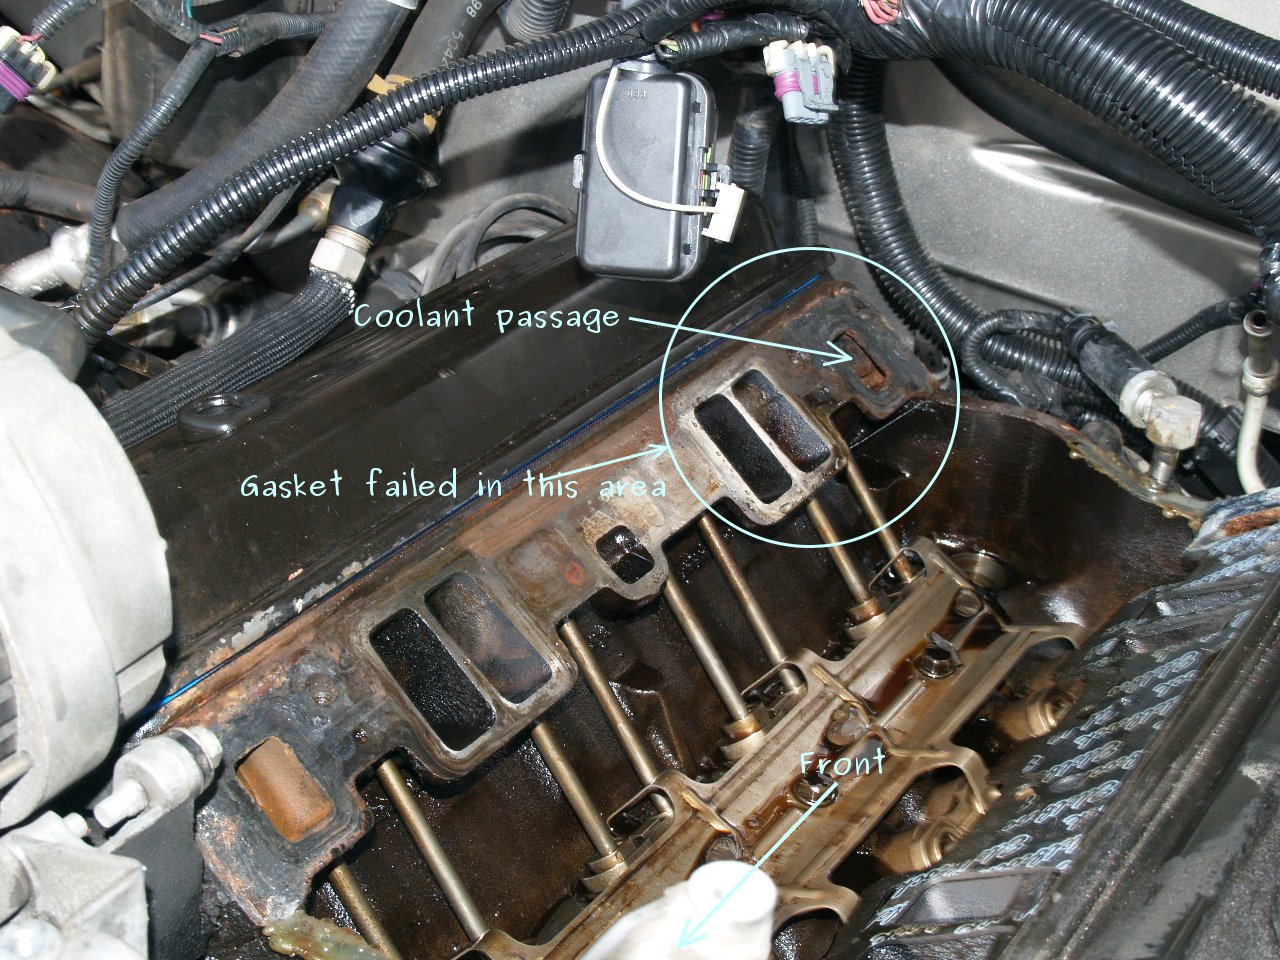 See P0911 in engine